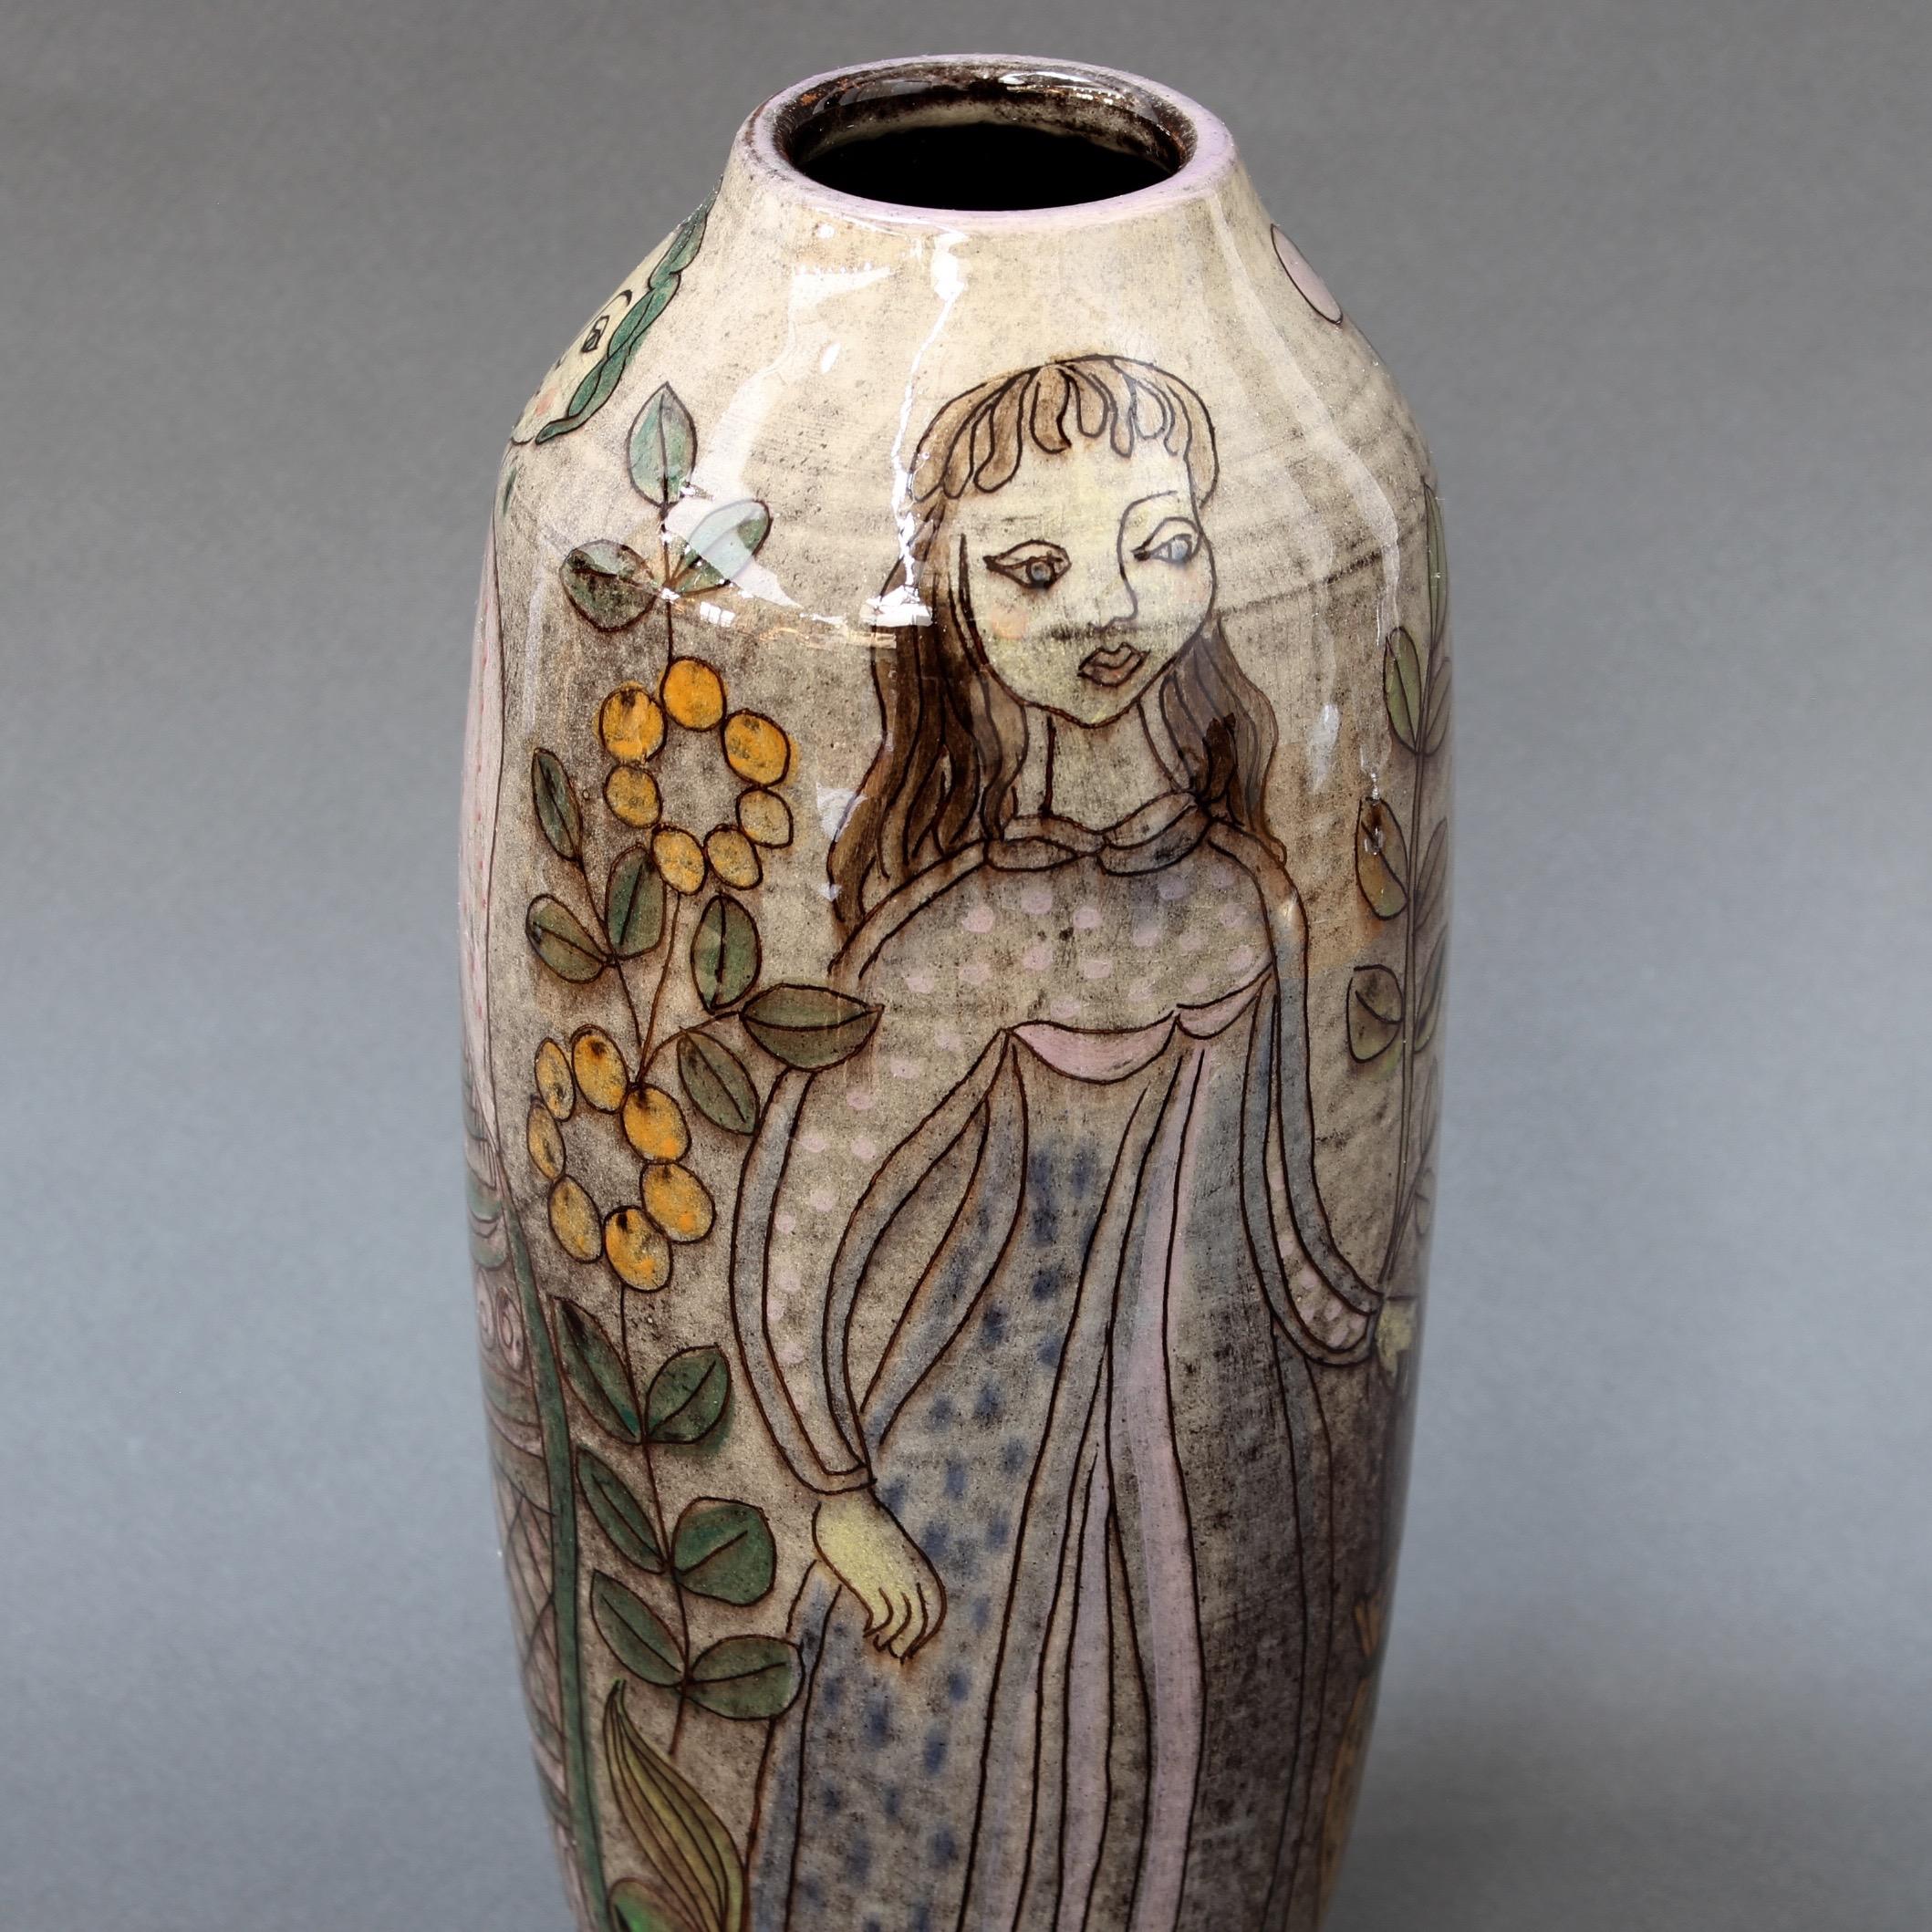 Midcentury ceramic glazed vase, circa 1960s. Acquired in France, this stunning vase has an elegant sheen with painted decoration of three women with flowers and plants. Classically shaped with head-turning style and grace, it would surely be a